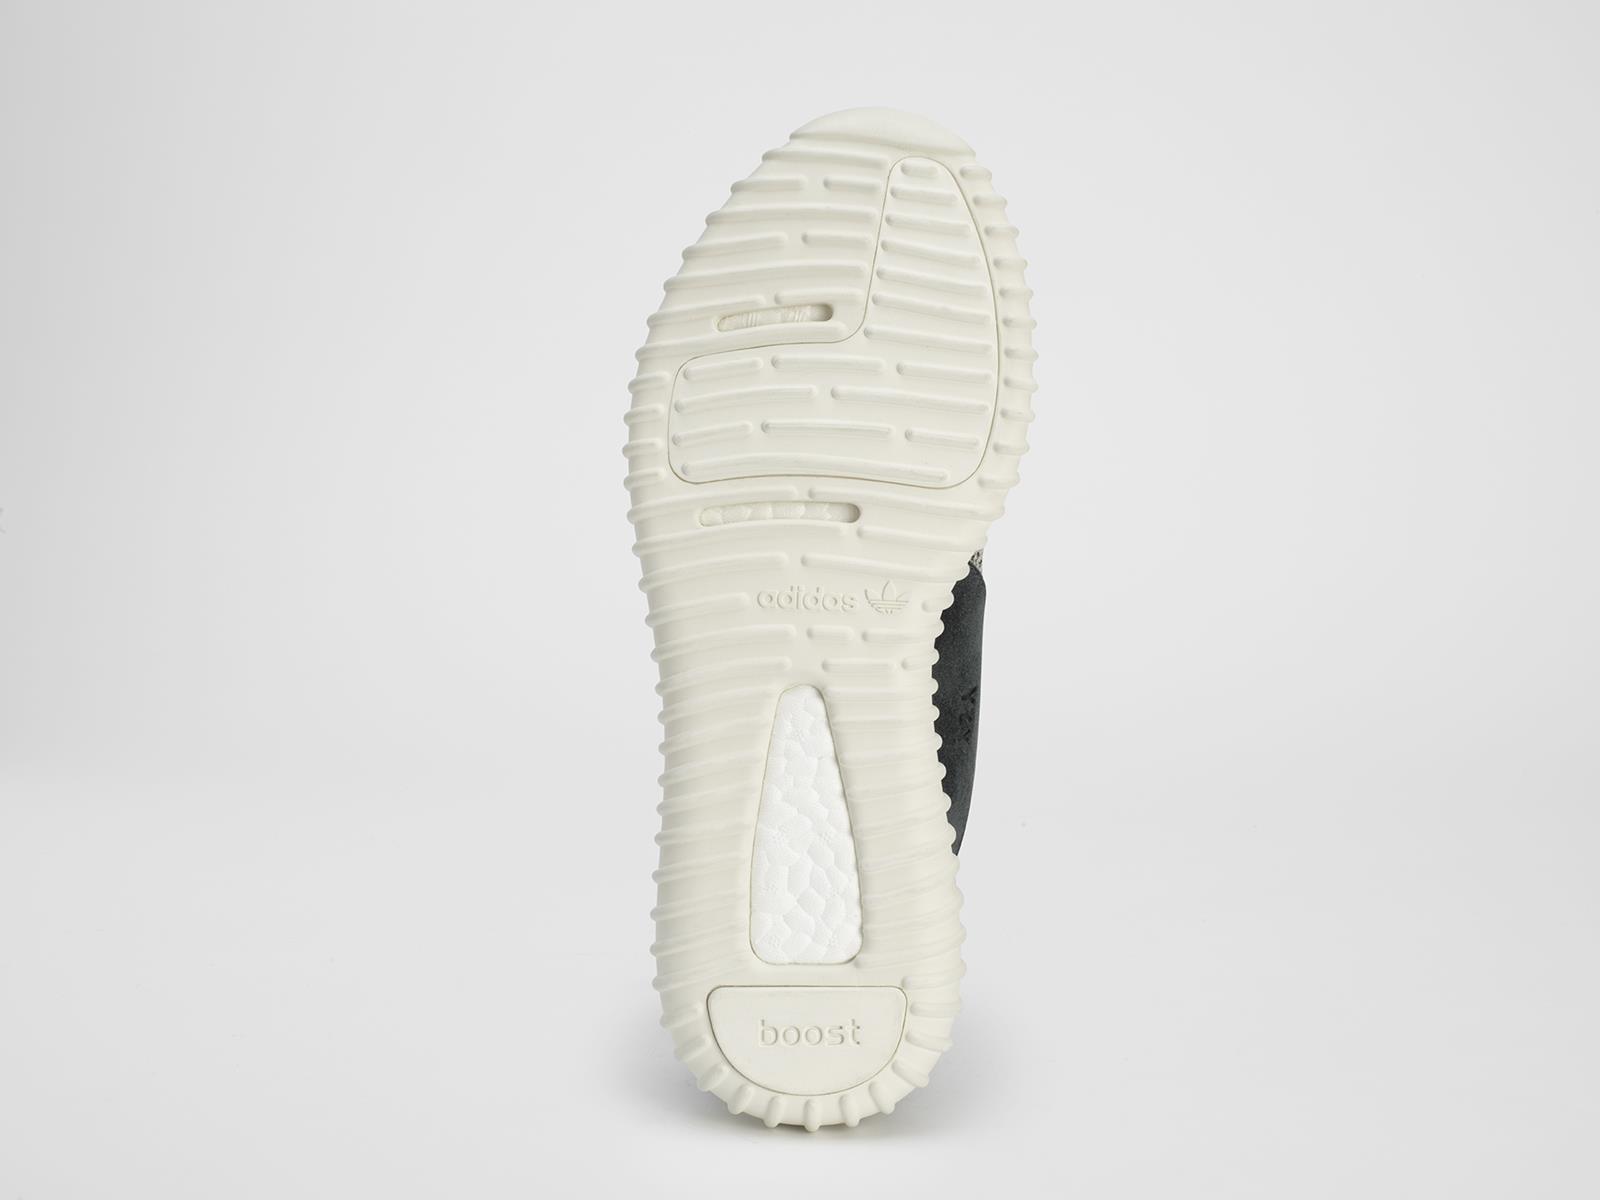 Yeezy Boost 350 by Kanye West e adidas Originals